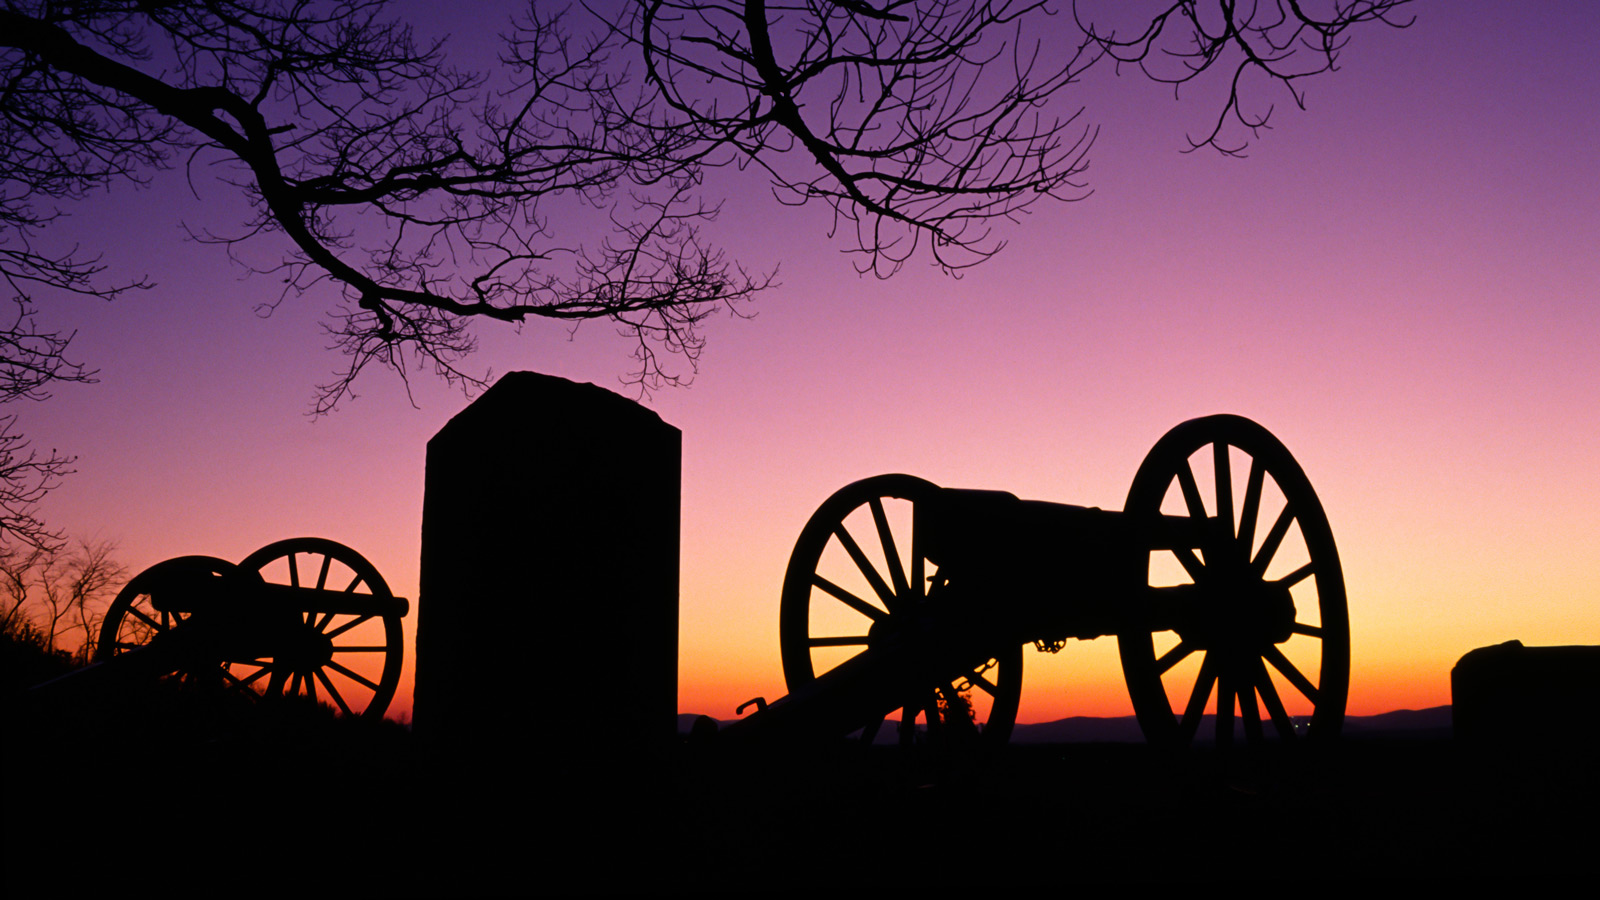 Relics from the civil War sit in the sunset